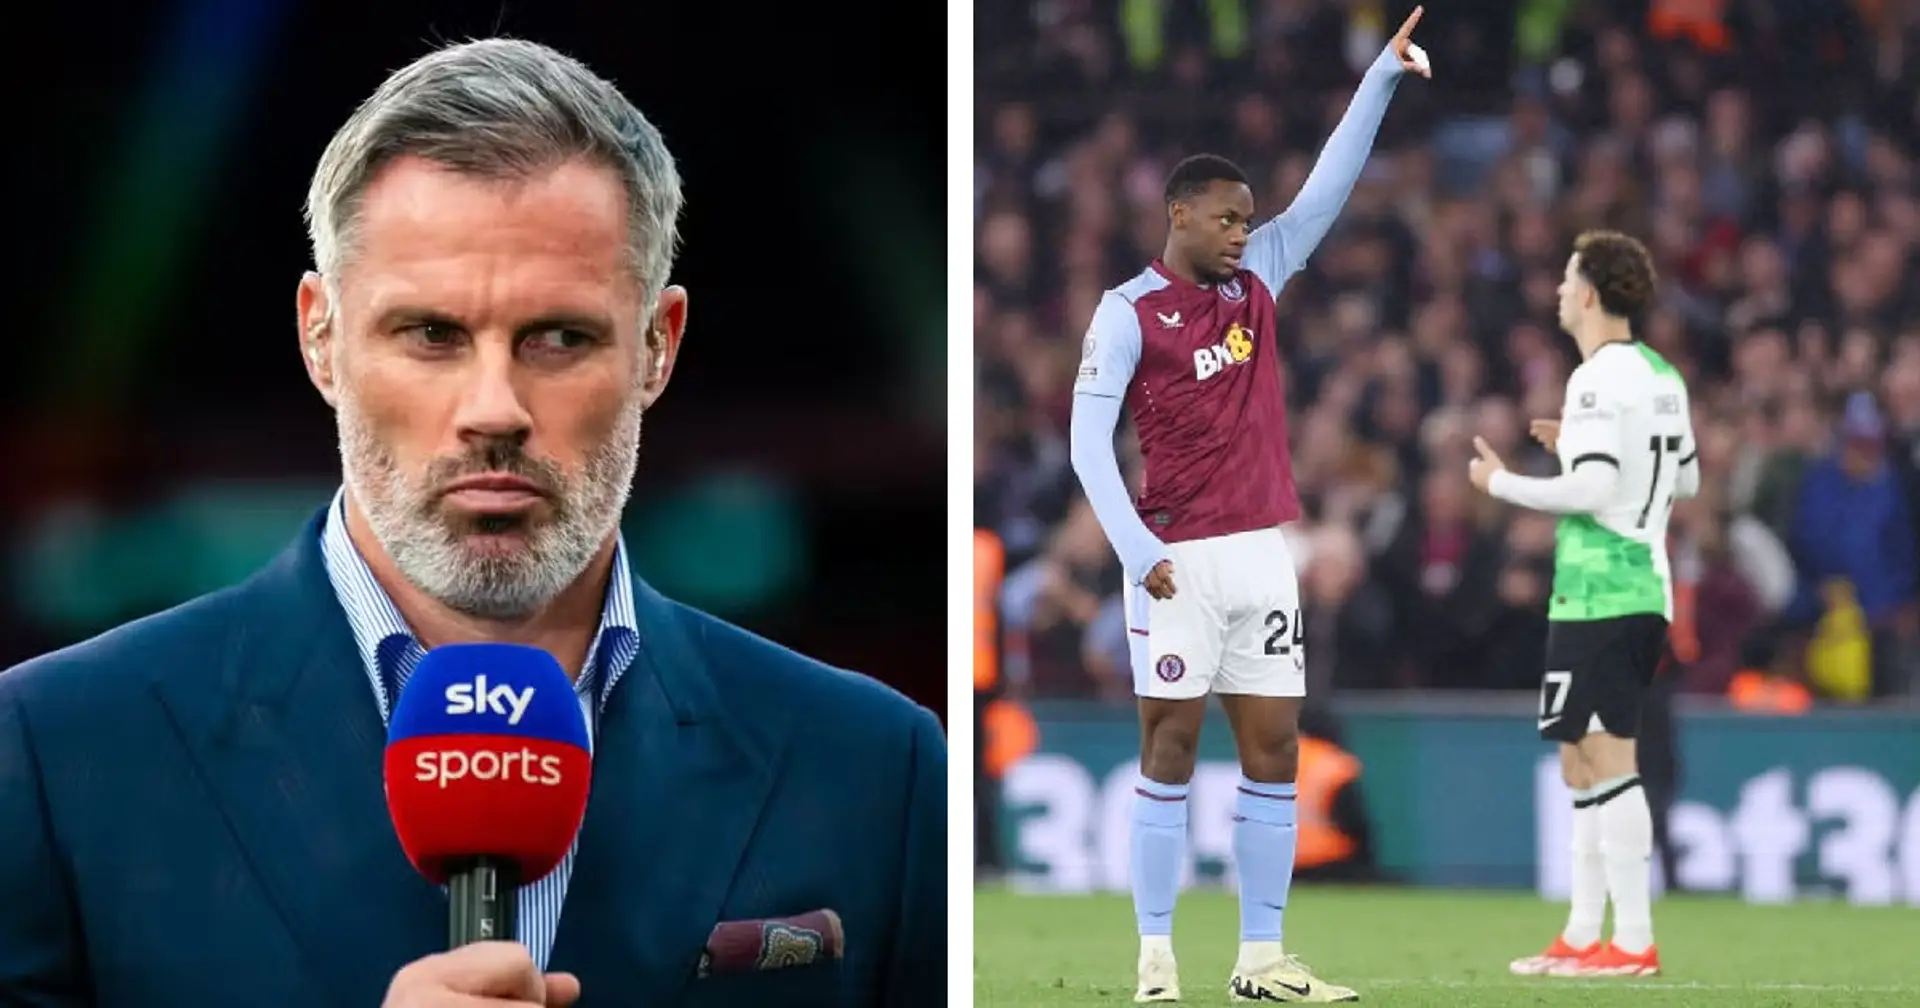 'That's why Liverpool are where they are': Carragher makes Arsenal and Man City comparison after Villa draw